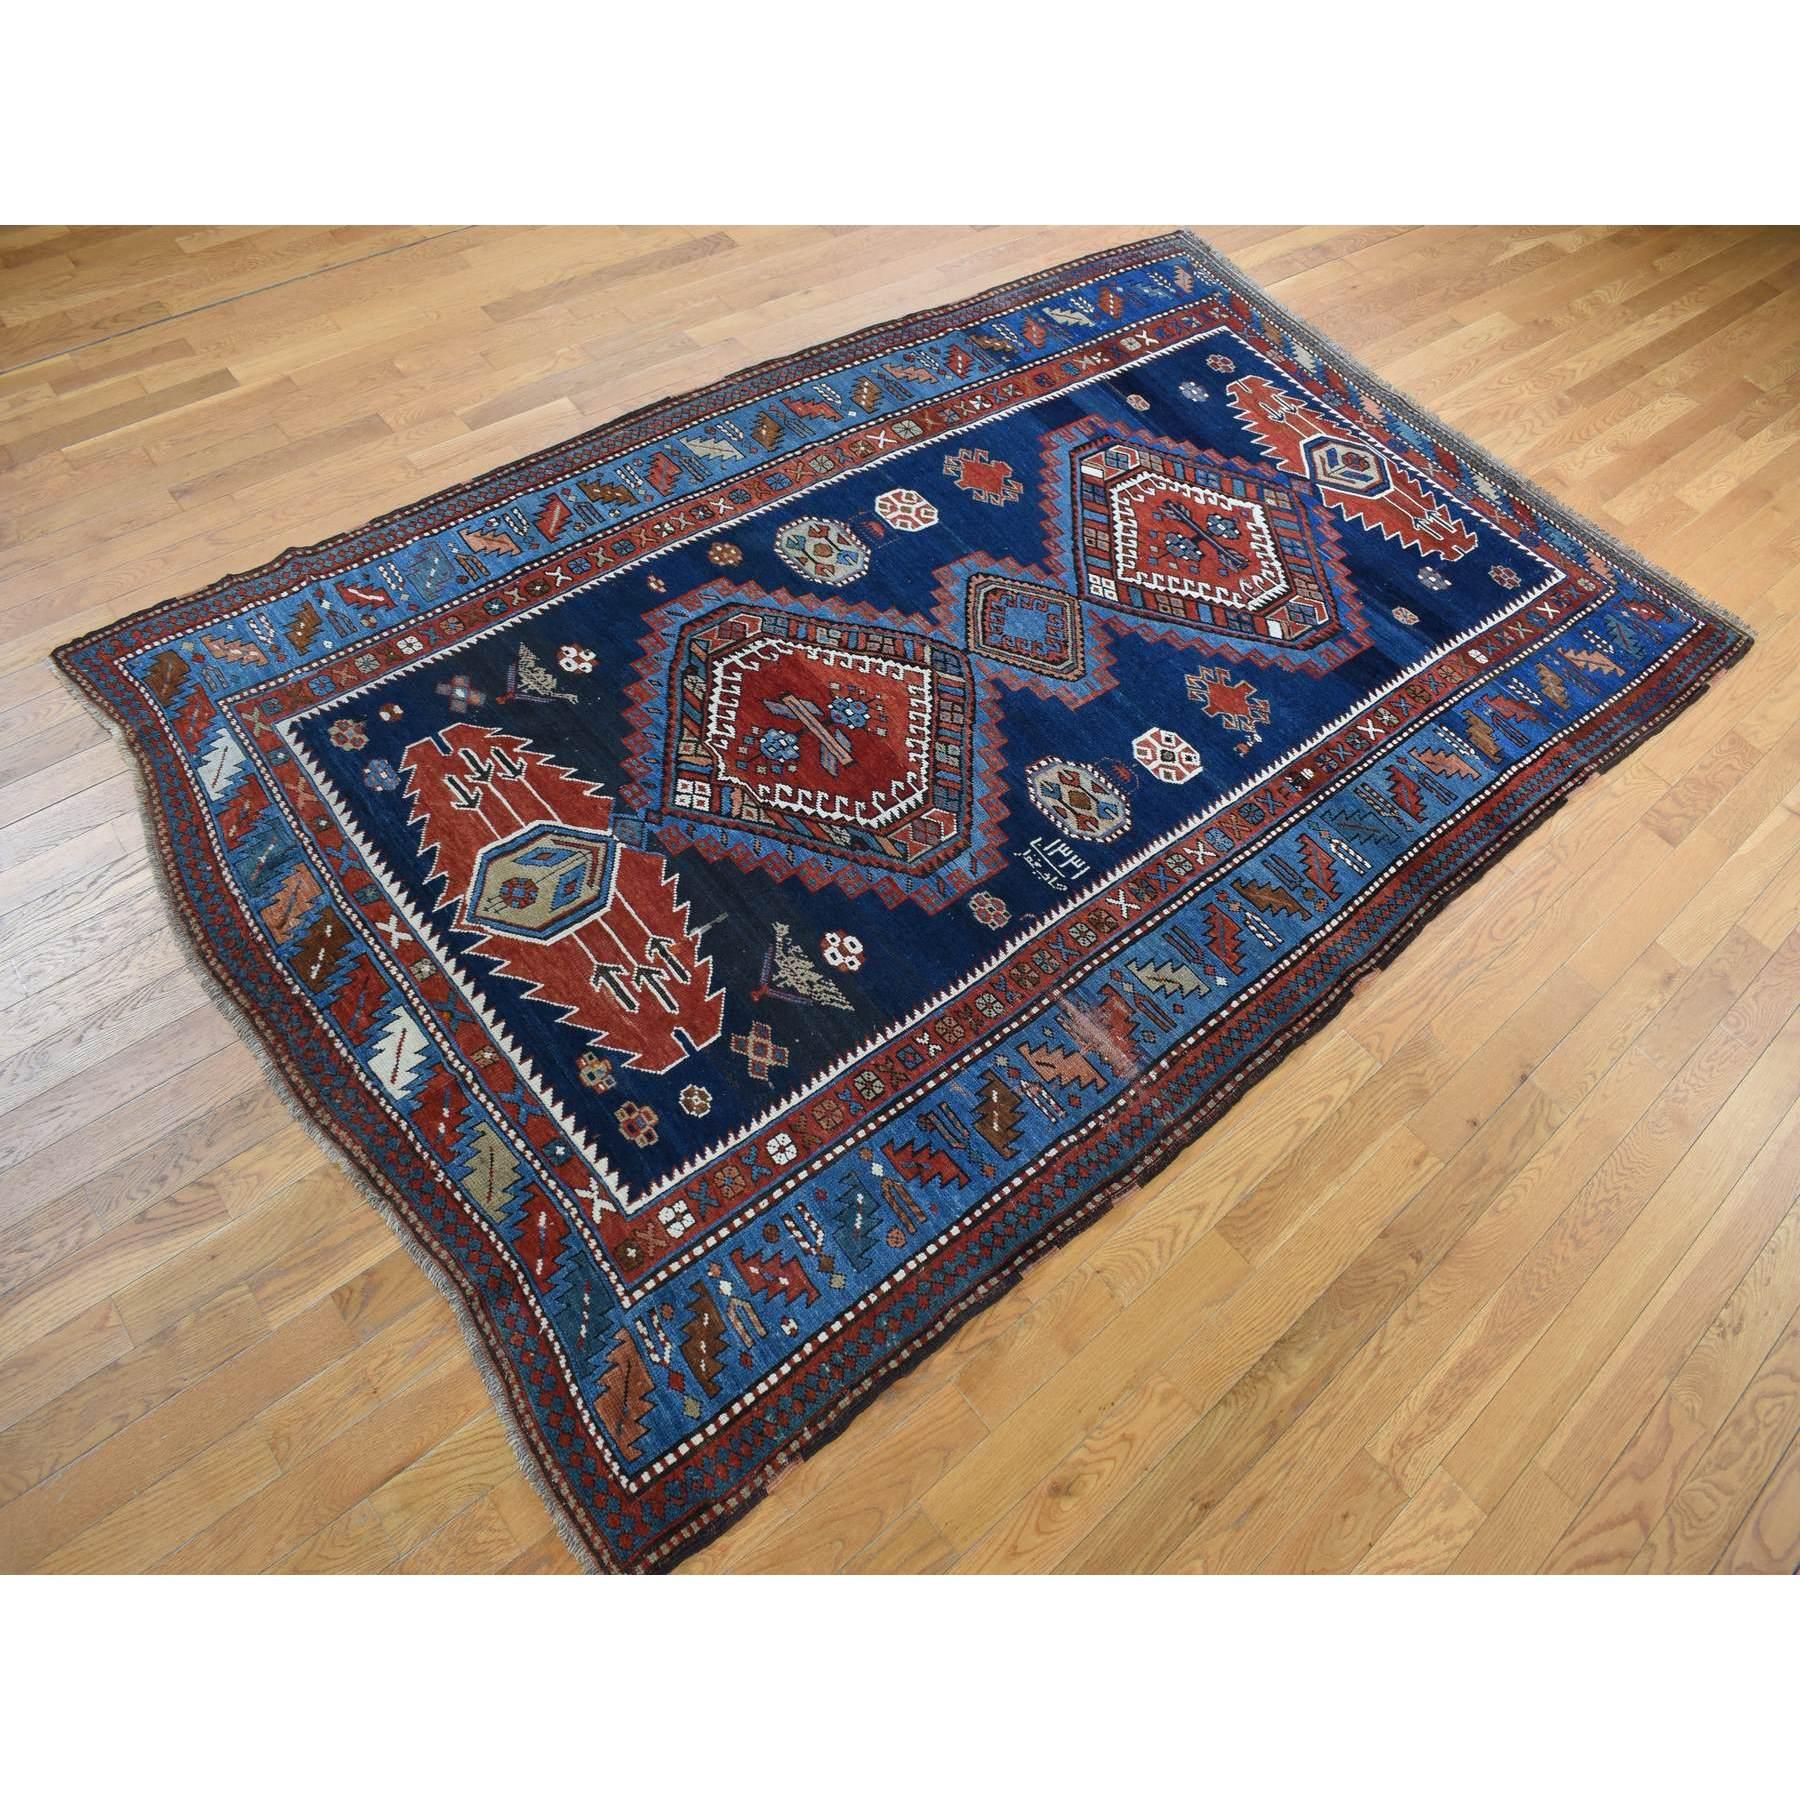 This fabulous Hand-Knotted carpet has been created and designed for extra strength and durability. This rug has been handcrafted for weeks in the traditional method that is used to make
Exact Rug Size in Feet and Inches : 6'2